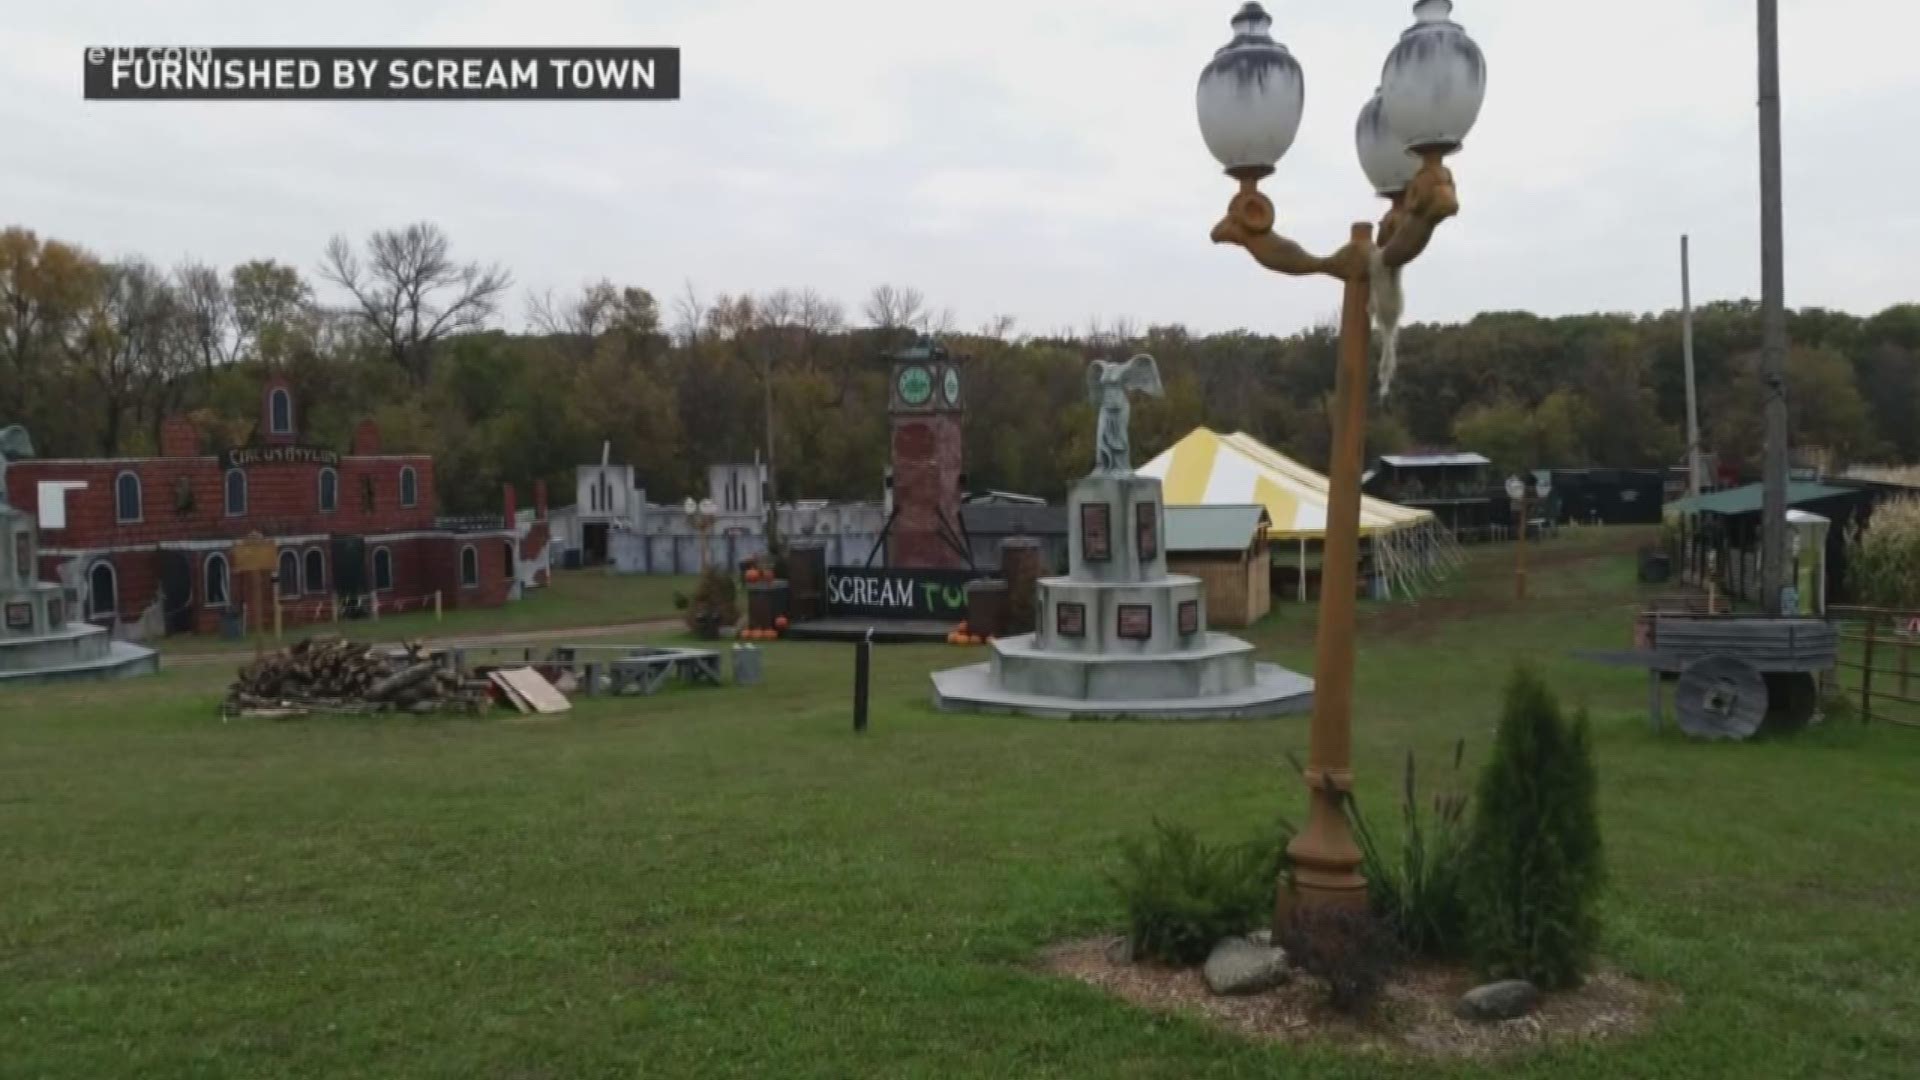 The owner of Scream Town, a Halloween attraction in Chaska, Minnesota, has apologized for his "poorly written" internal memo.